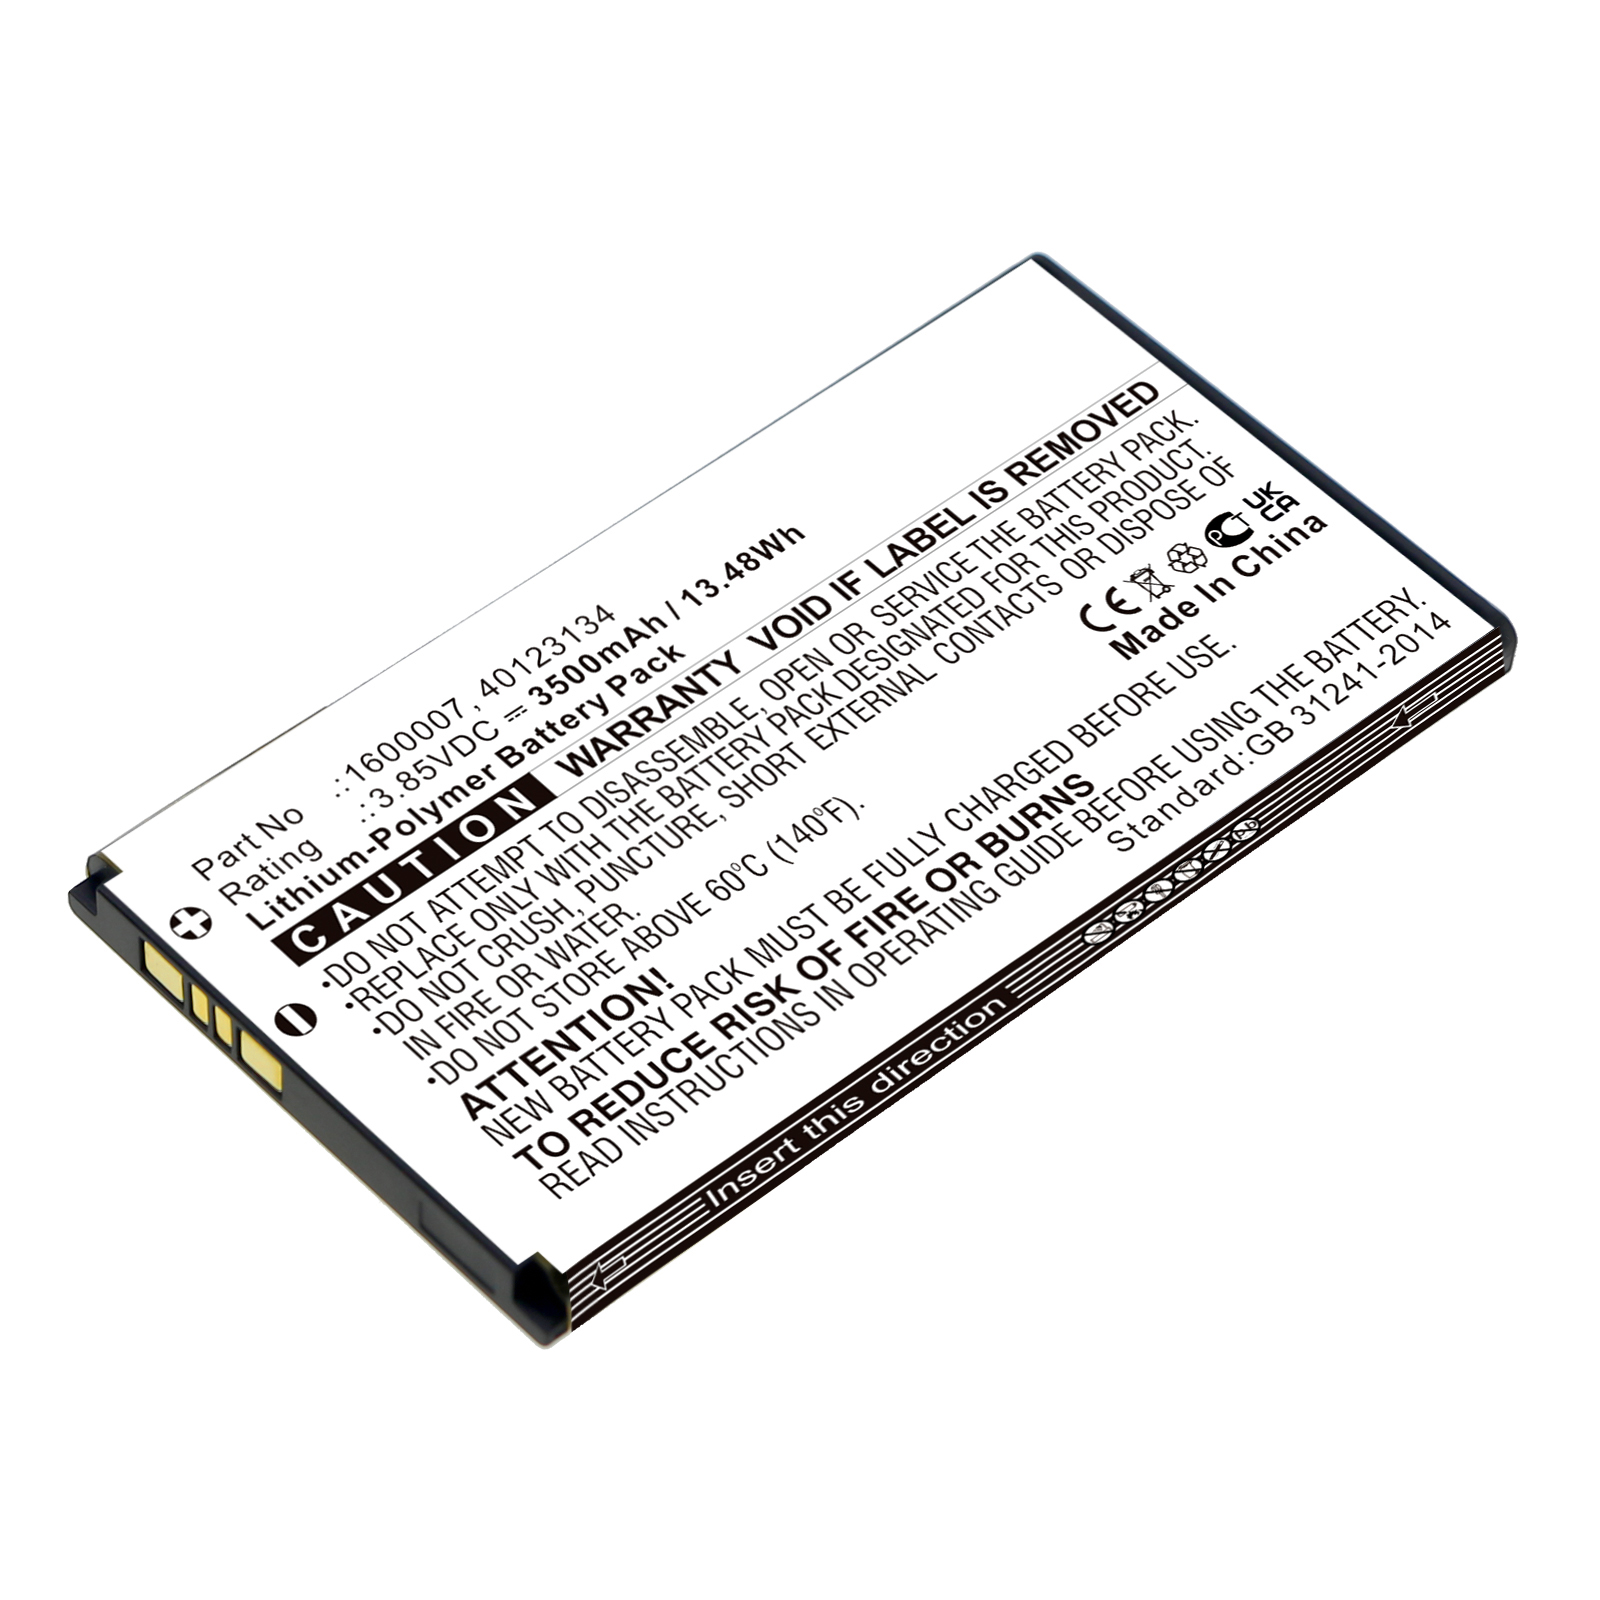 Batteries for InseegoWifi Hotspot